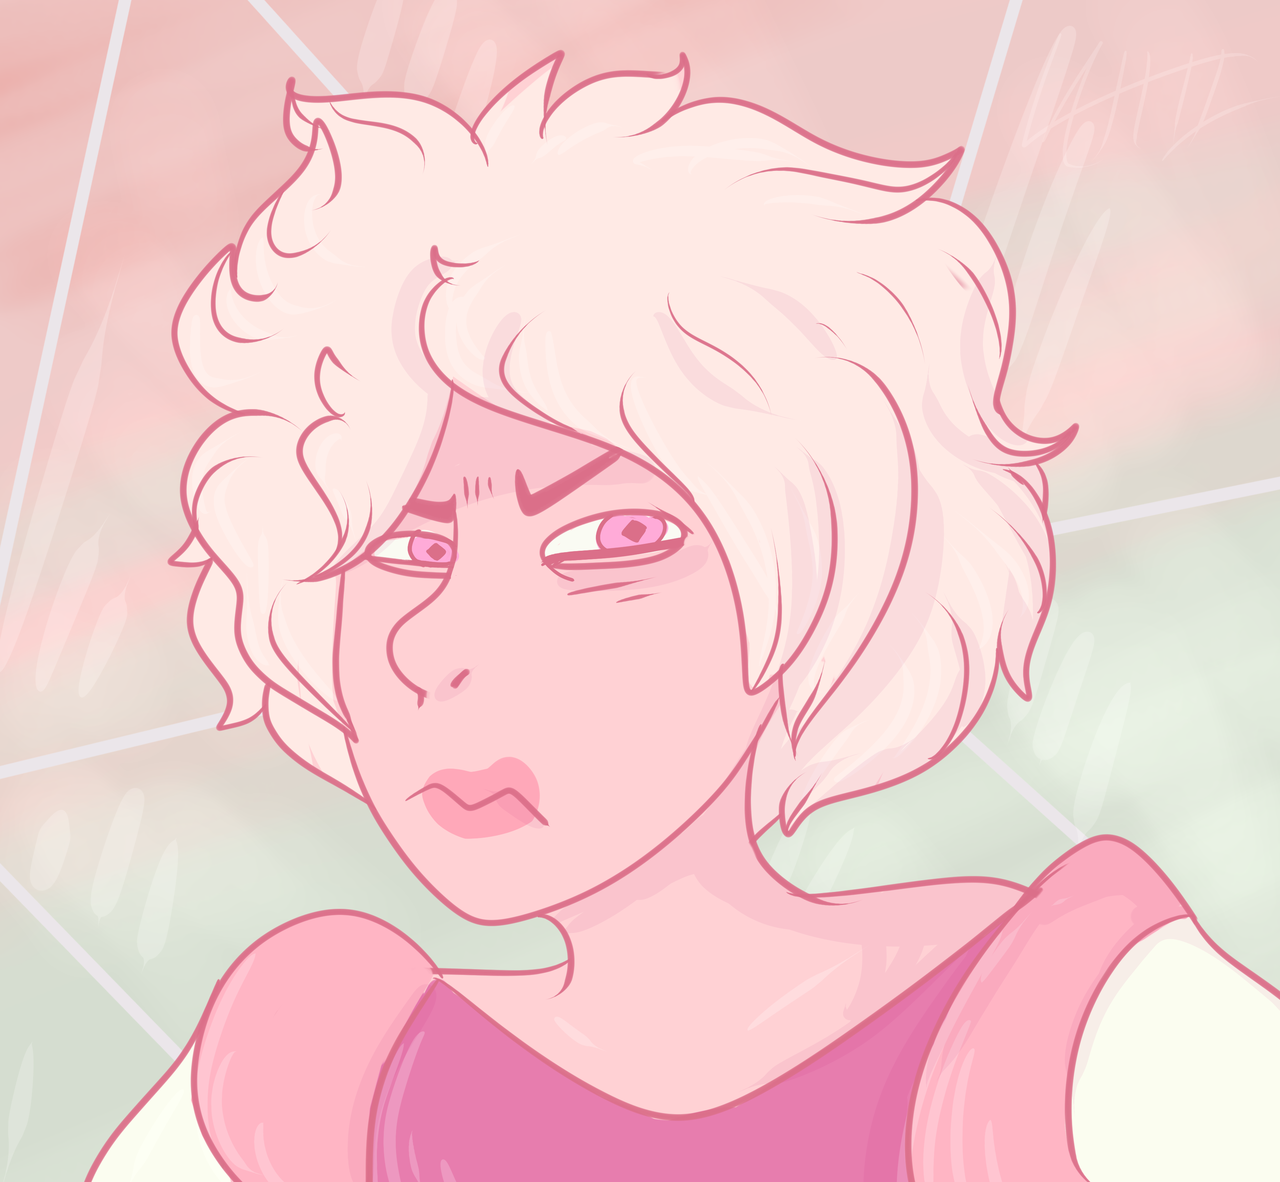 Angry fluffy matriarch - Ive been meaning to doodle pink diamond for ages, rarely get around to drawing things that arent anthros so here ya go. Okay to tag as kin/me/ect and free to use as an icon if...